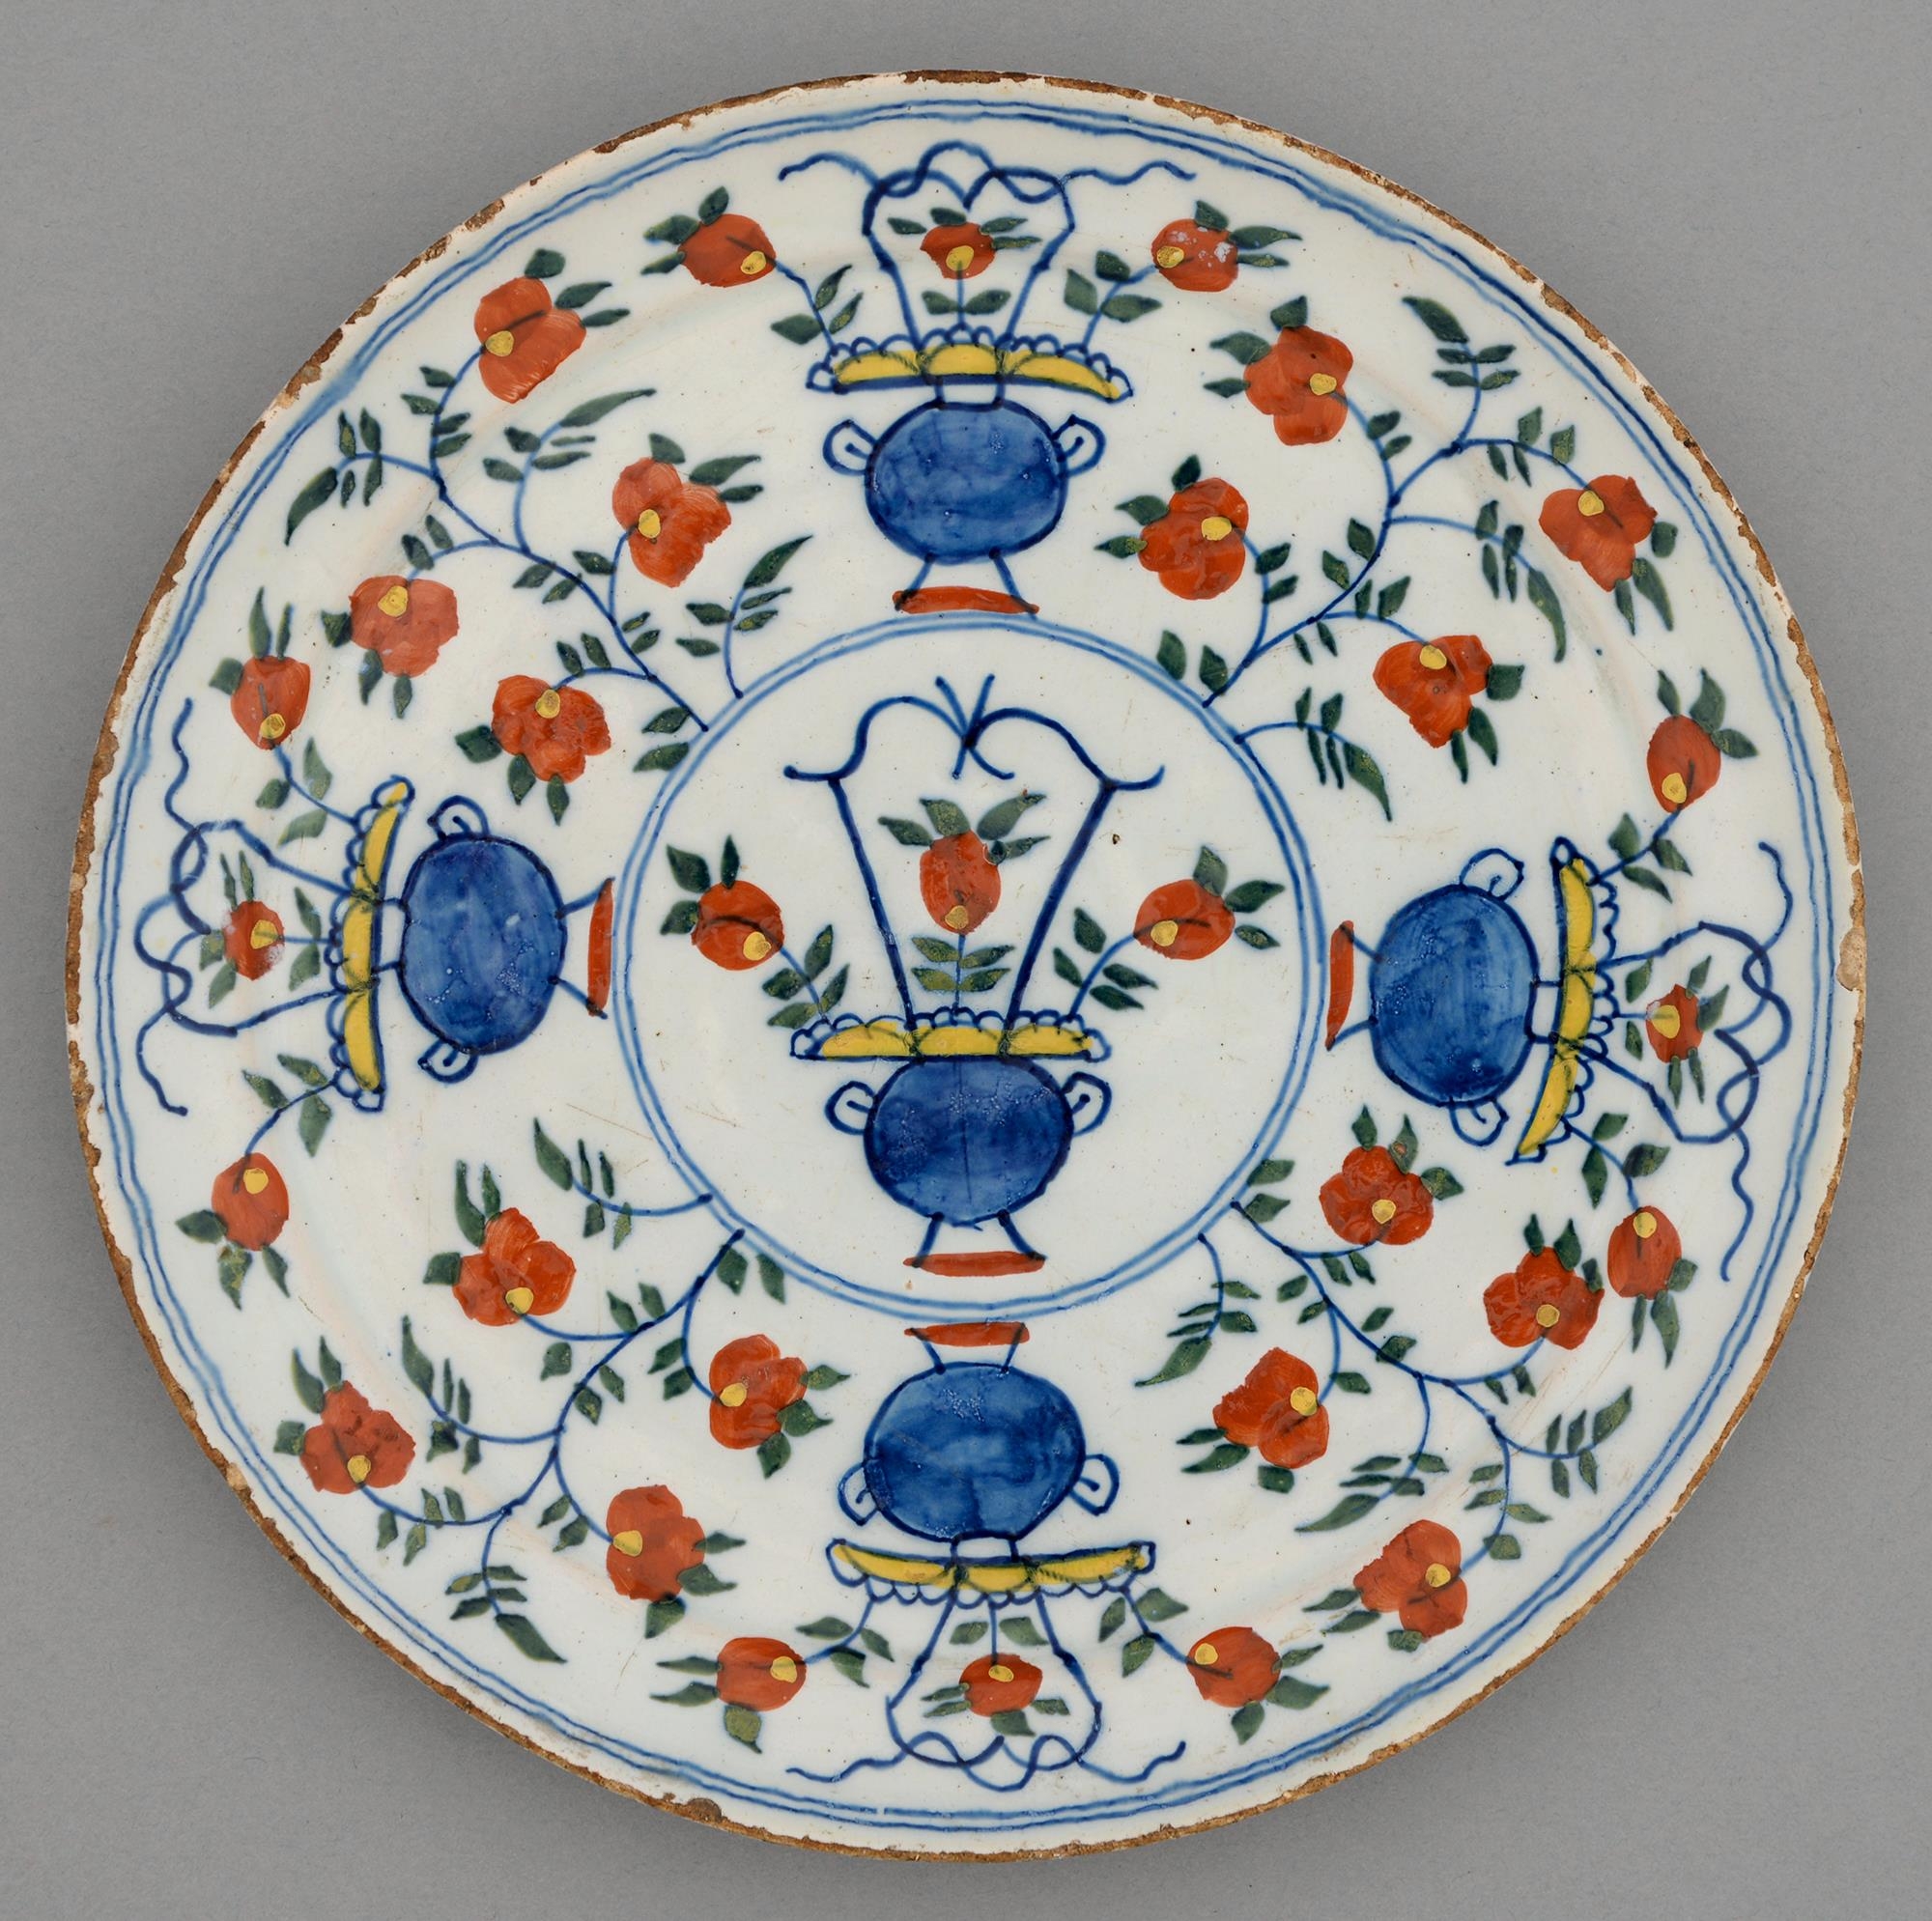 A Dutch Delftware plate, 18th c, painted in blue, green, red and yellow with a basket of flowers